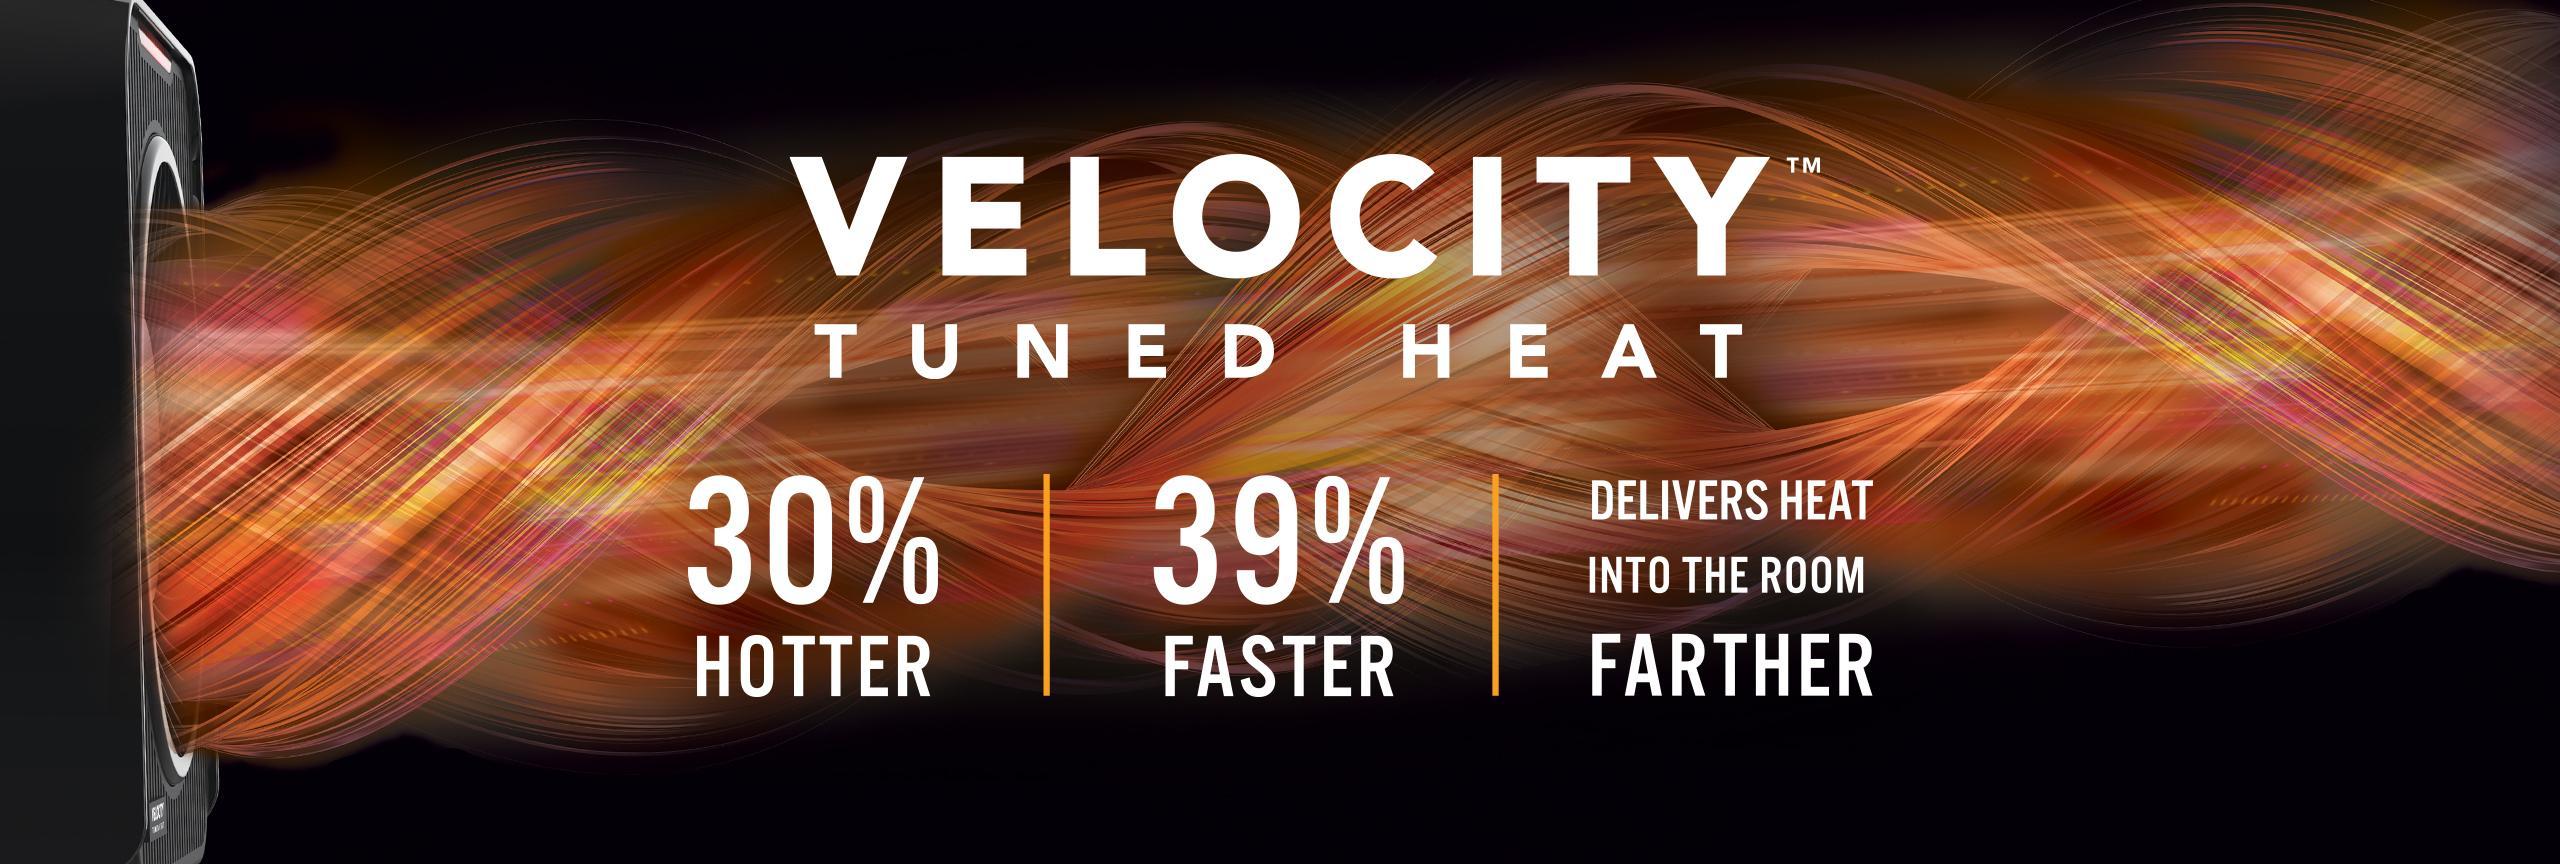 Graphic banner of a Velocity 1 personal heater blowing out hot air indicated by orange and red swirls. The banner says Velocity Tuned Heat 30% Hotter, 39% Faster Delivers Heat Into the Room Farther